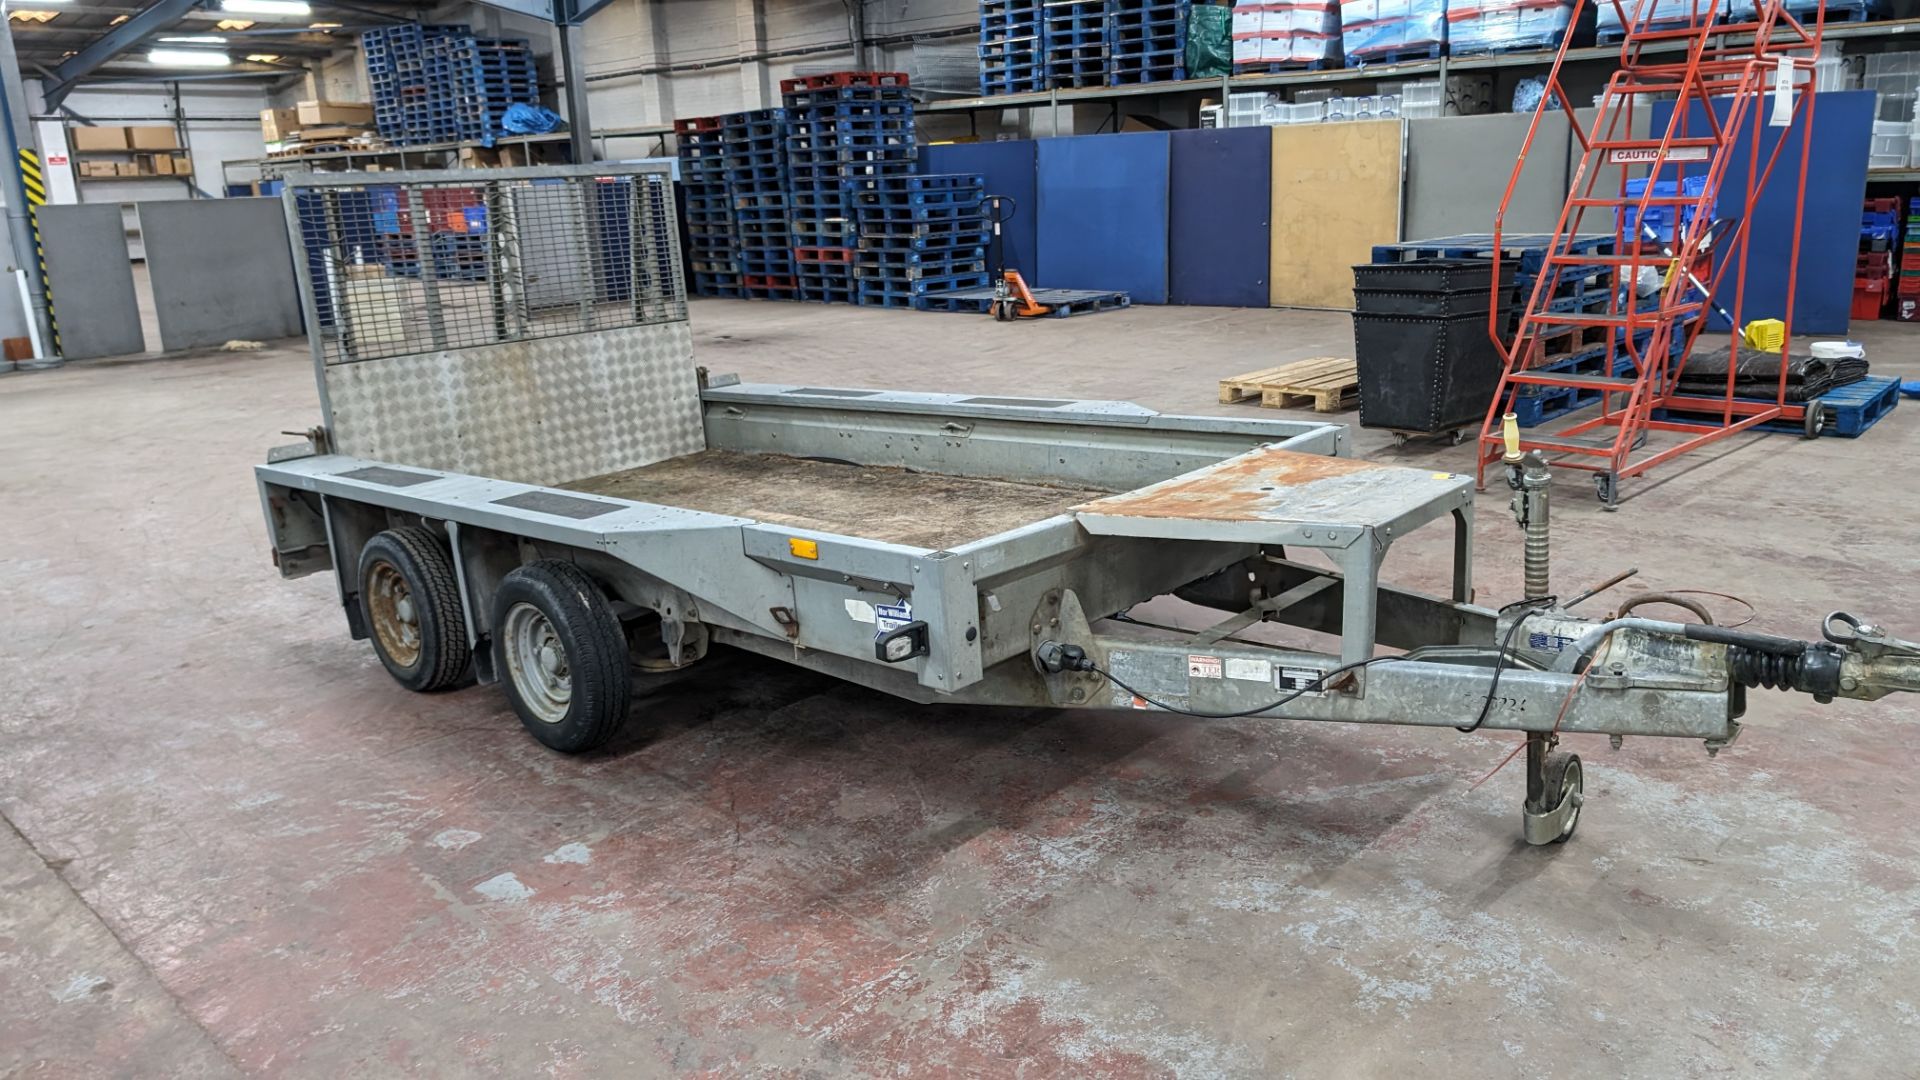 Ifor Williams twin axle plant trailer. Please note VAT no longer will apply to this lot